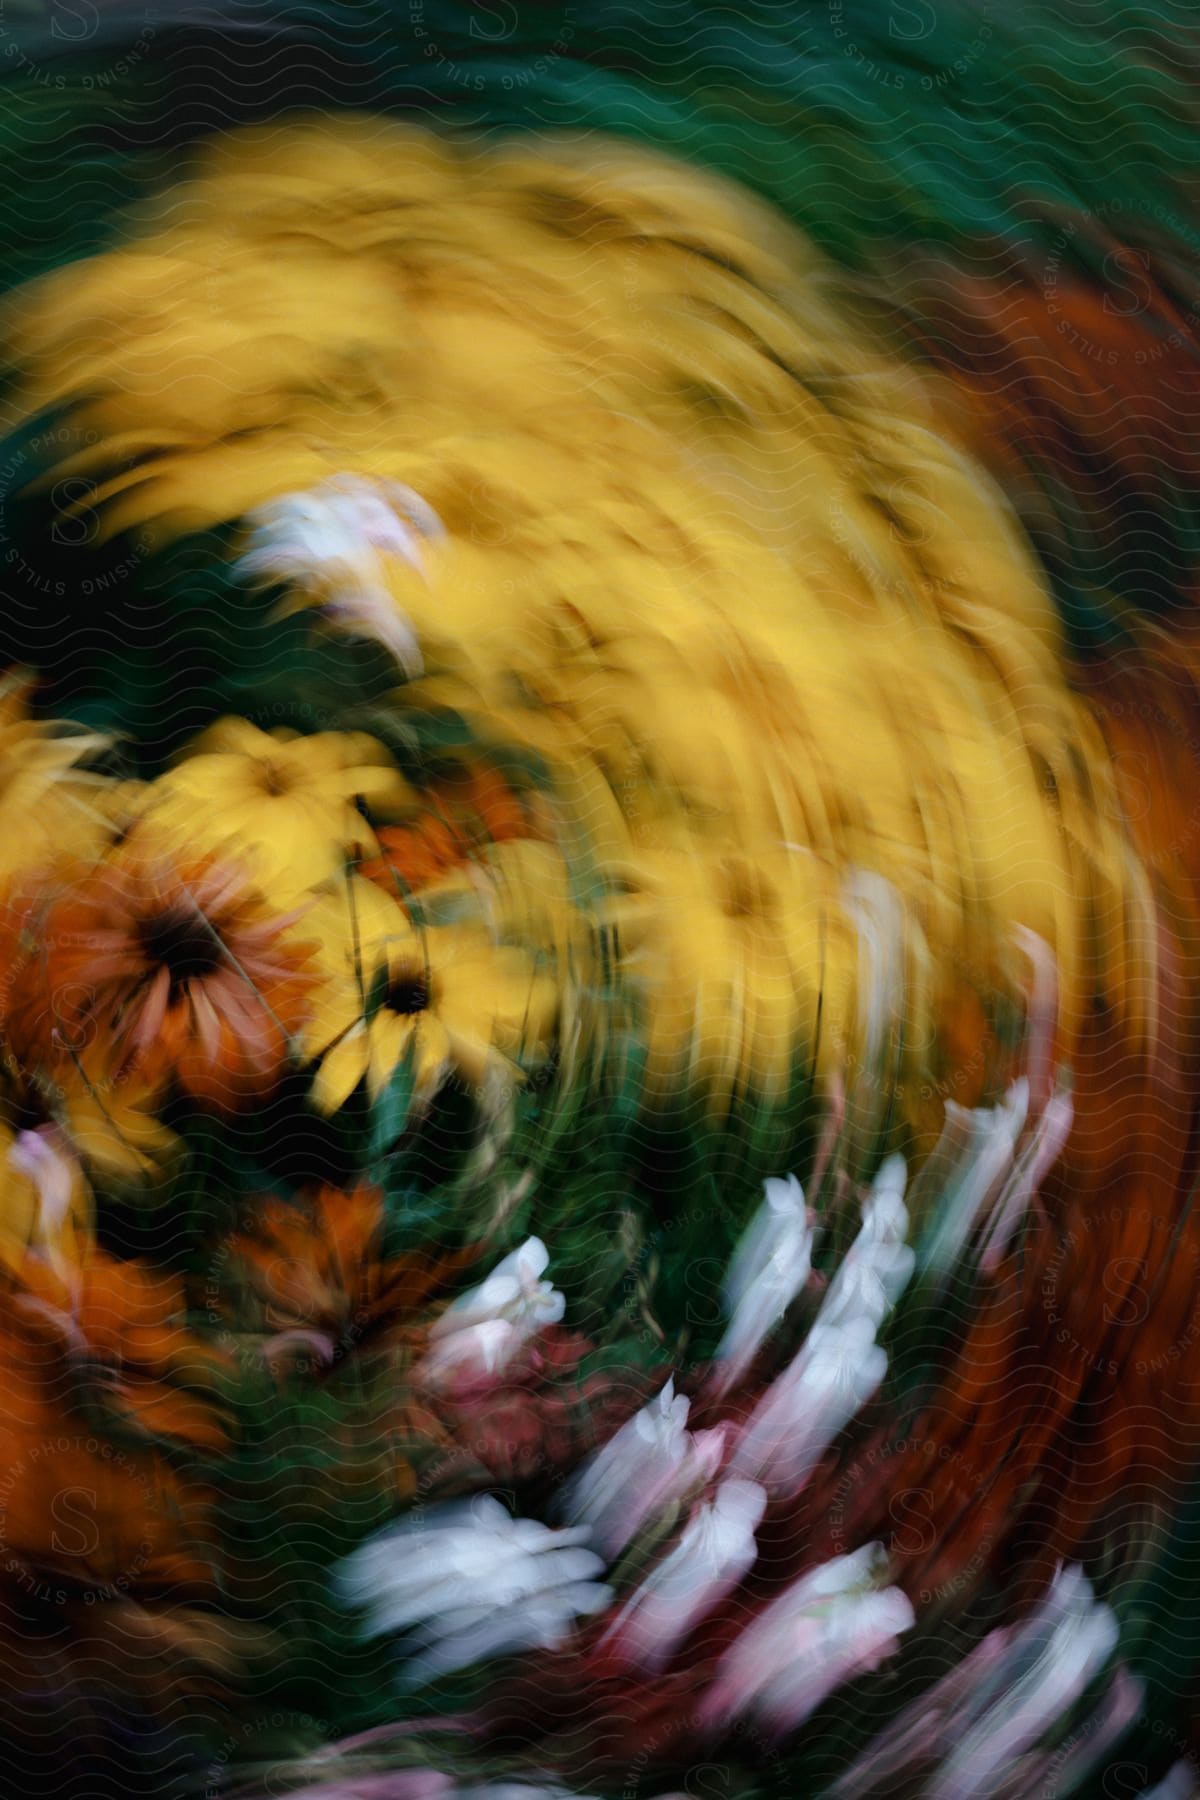 Abstract flowers swirling and blurry in vibrant colors